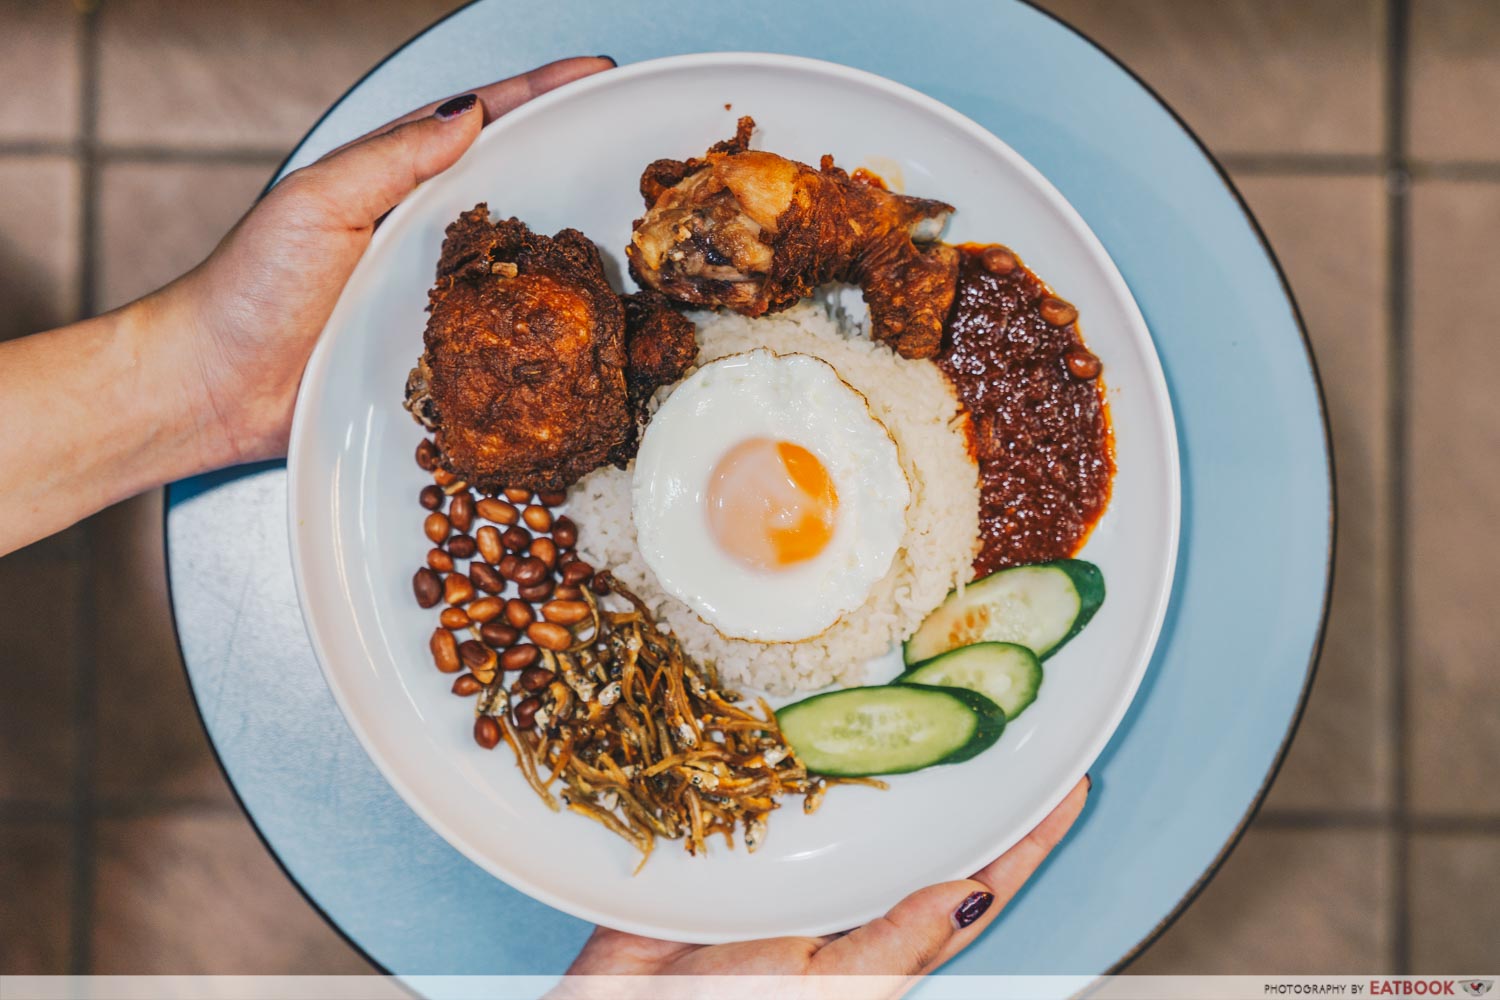 nasi lemak delivery - spice and rice